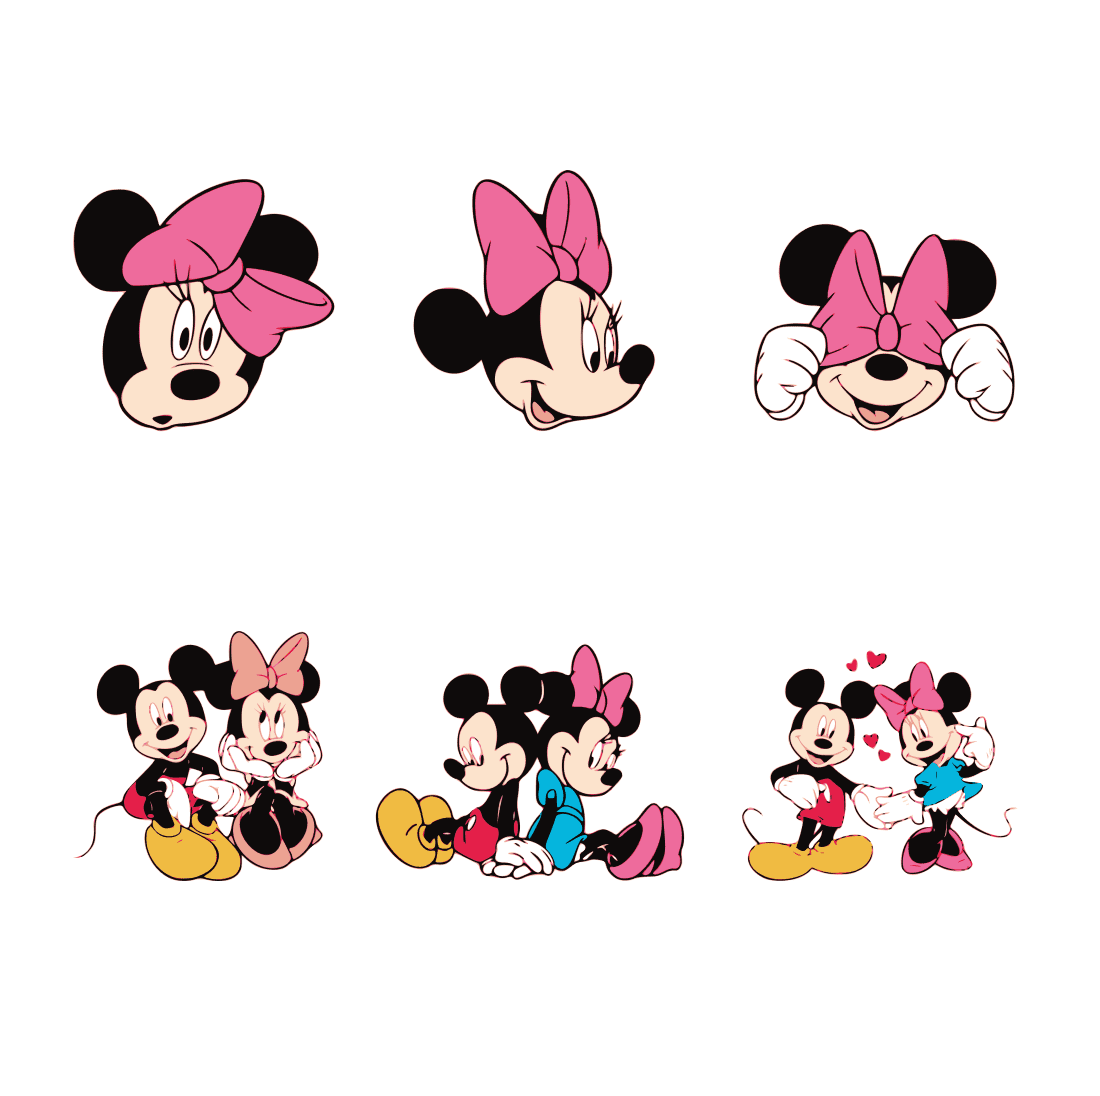 A selection of colorful images of minnie mouse and mickey mouse.